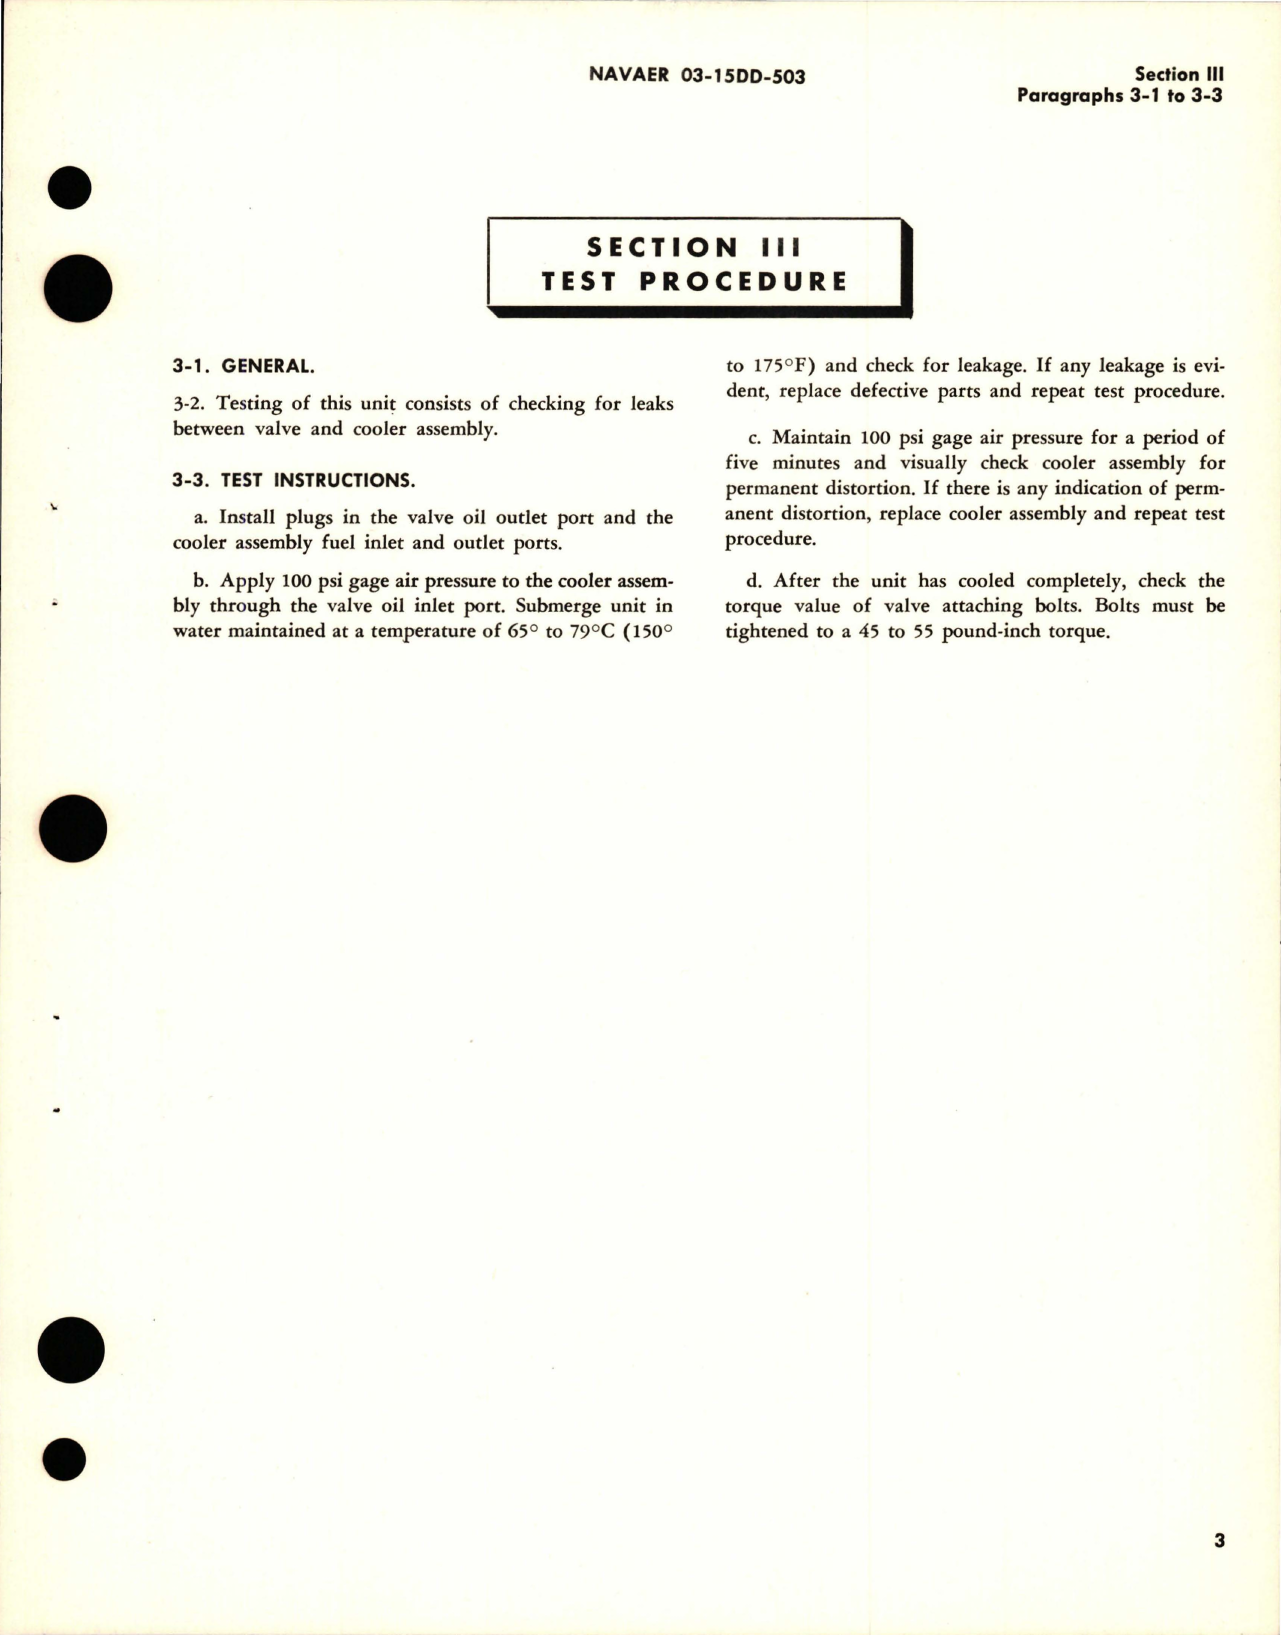 Sample page 5 from AirCorps Library document: Overhaul Instructions for Oil Temperature Regulators, Heat Exchanger and Fuel Temp Regulator